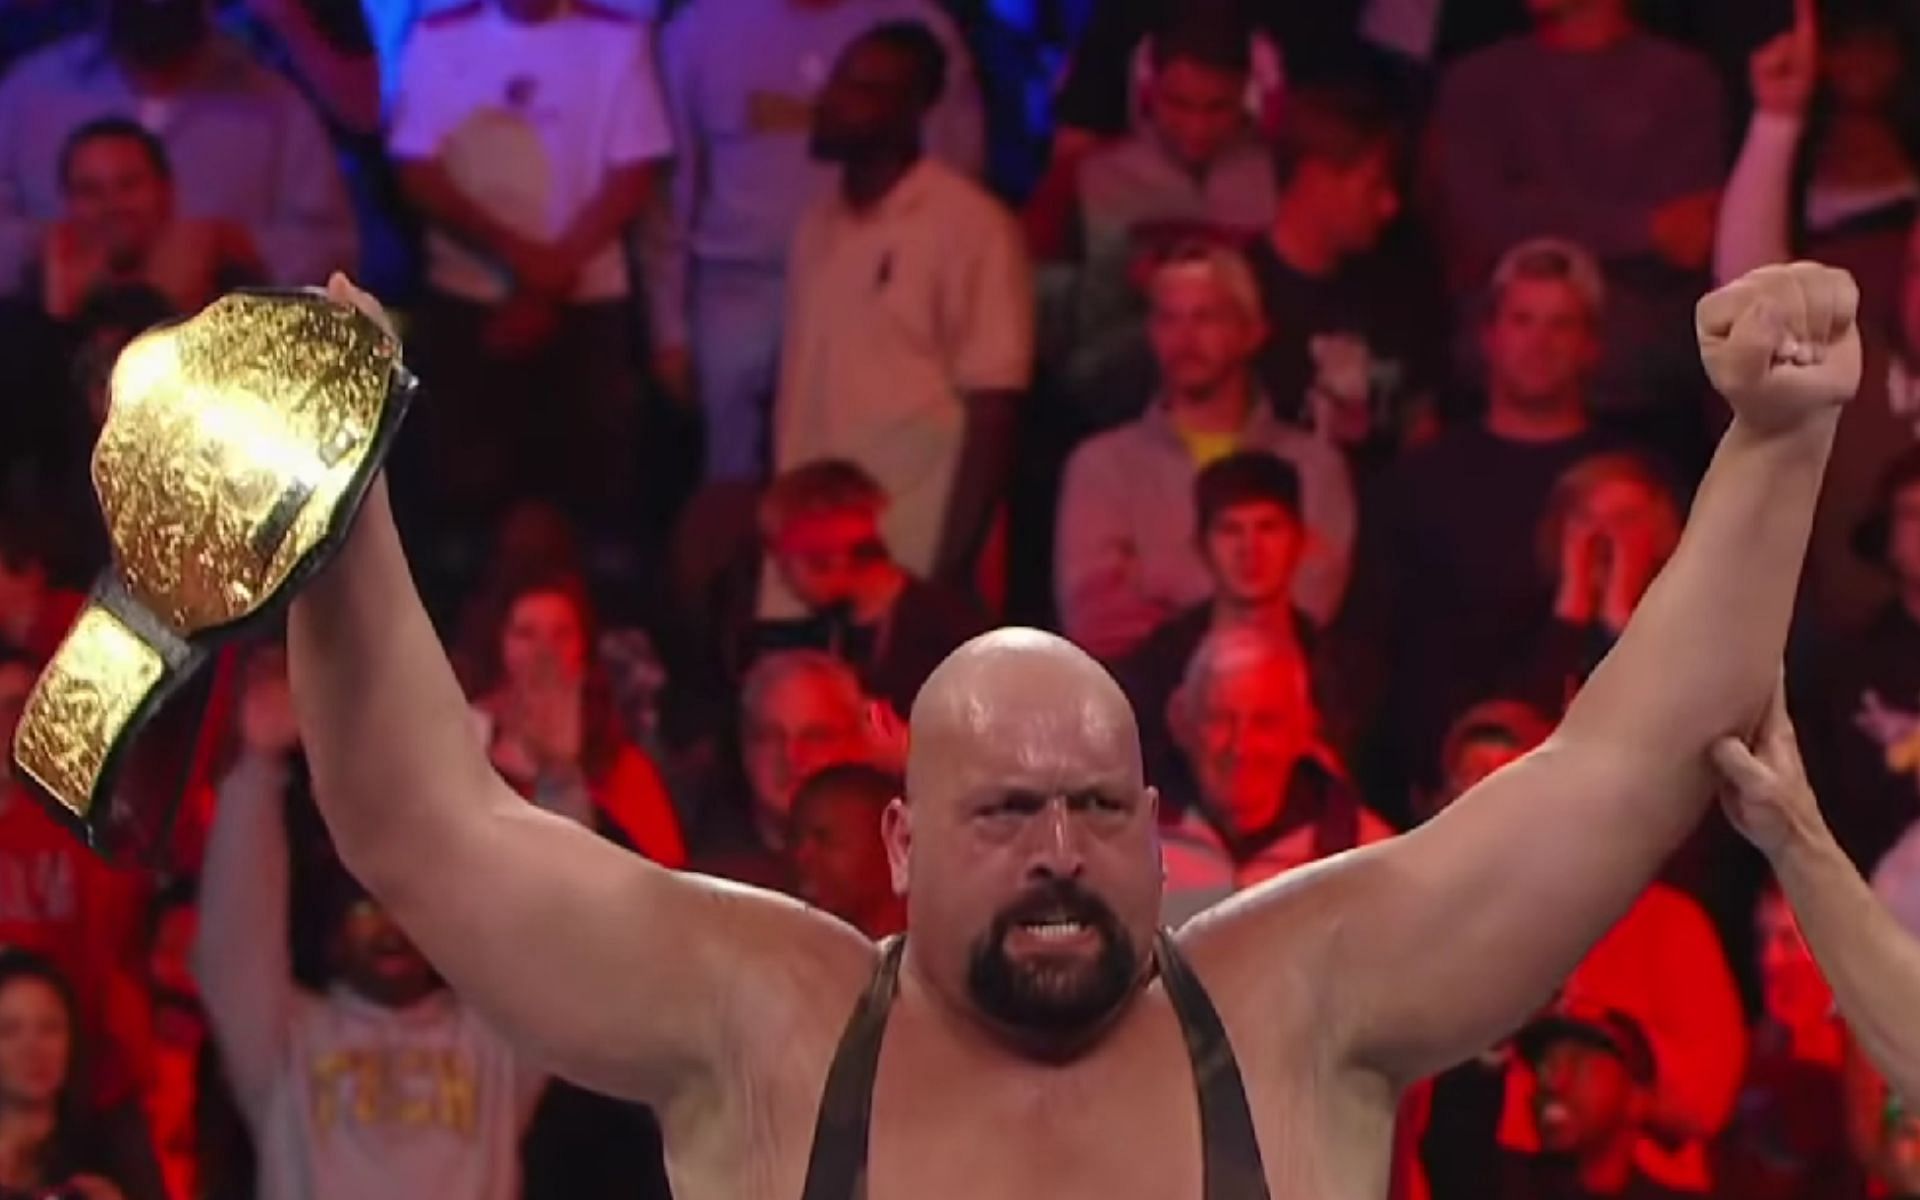 Paul Wight is a six-time world champion